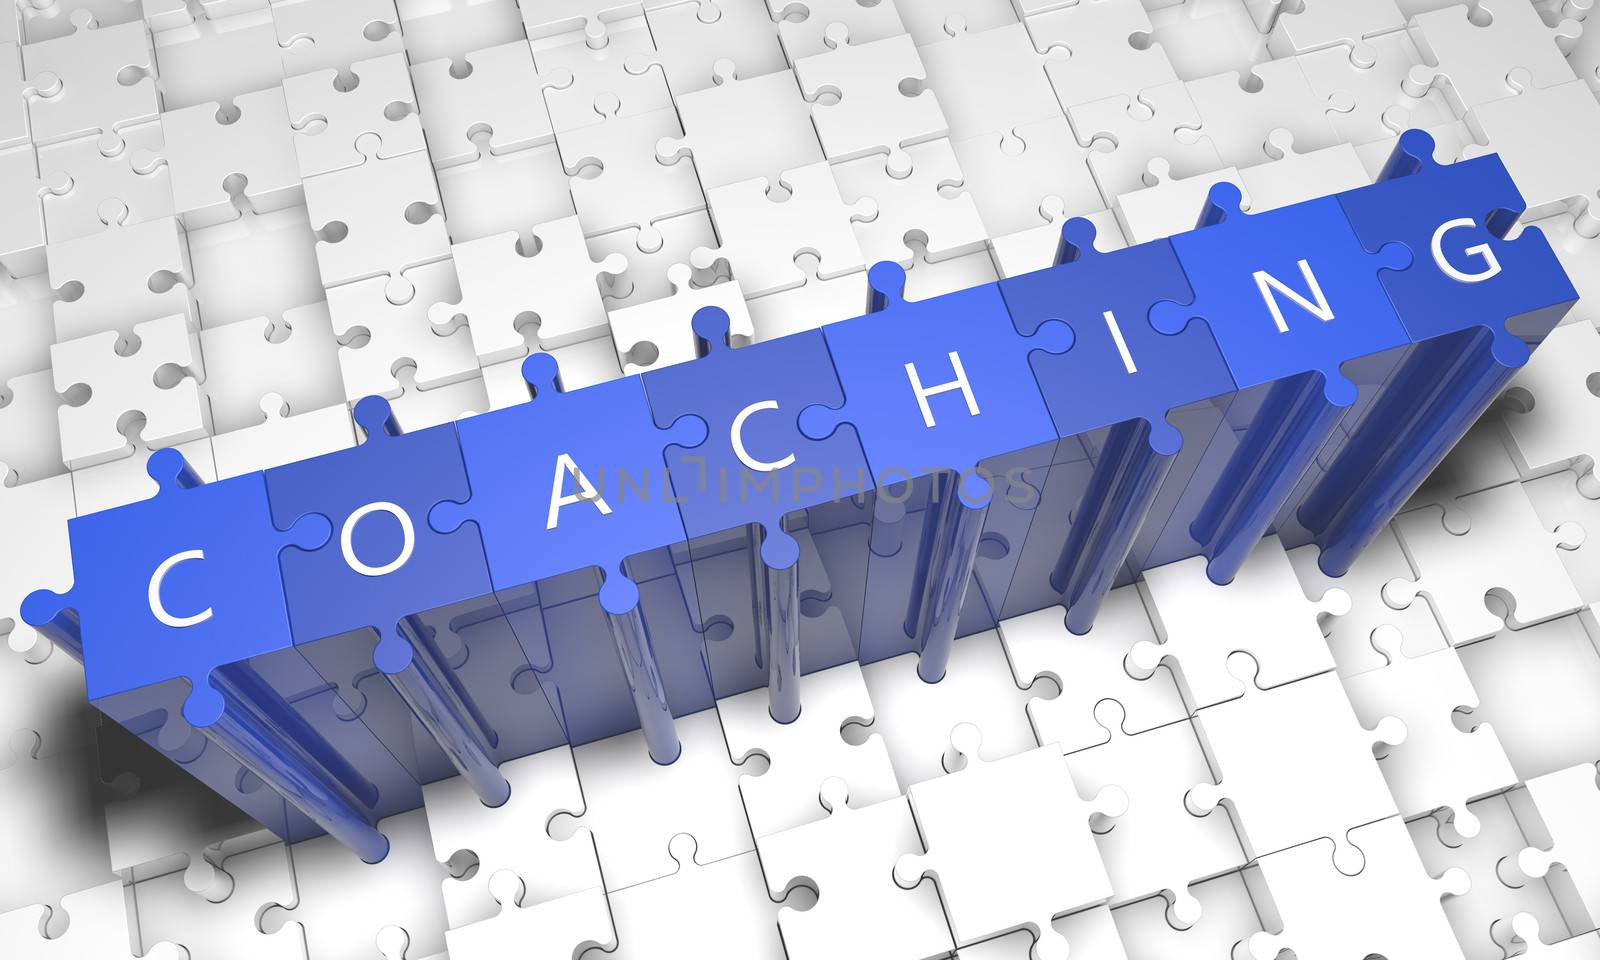 Coaching - puzzle 3d render illustration with text on blue jigsaw pieces stick out of white pieces